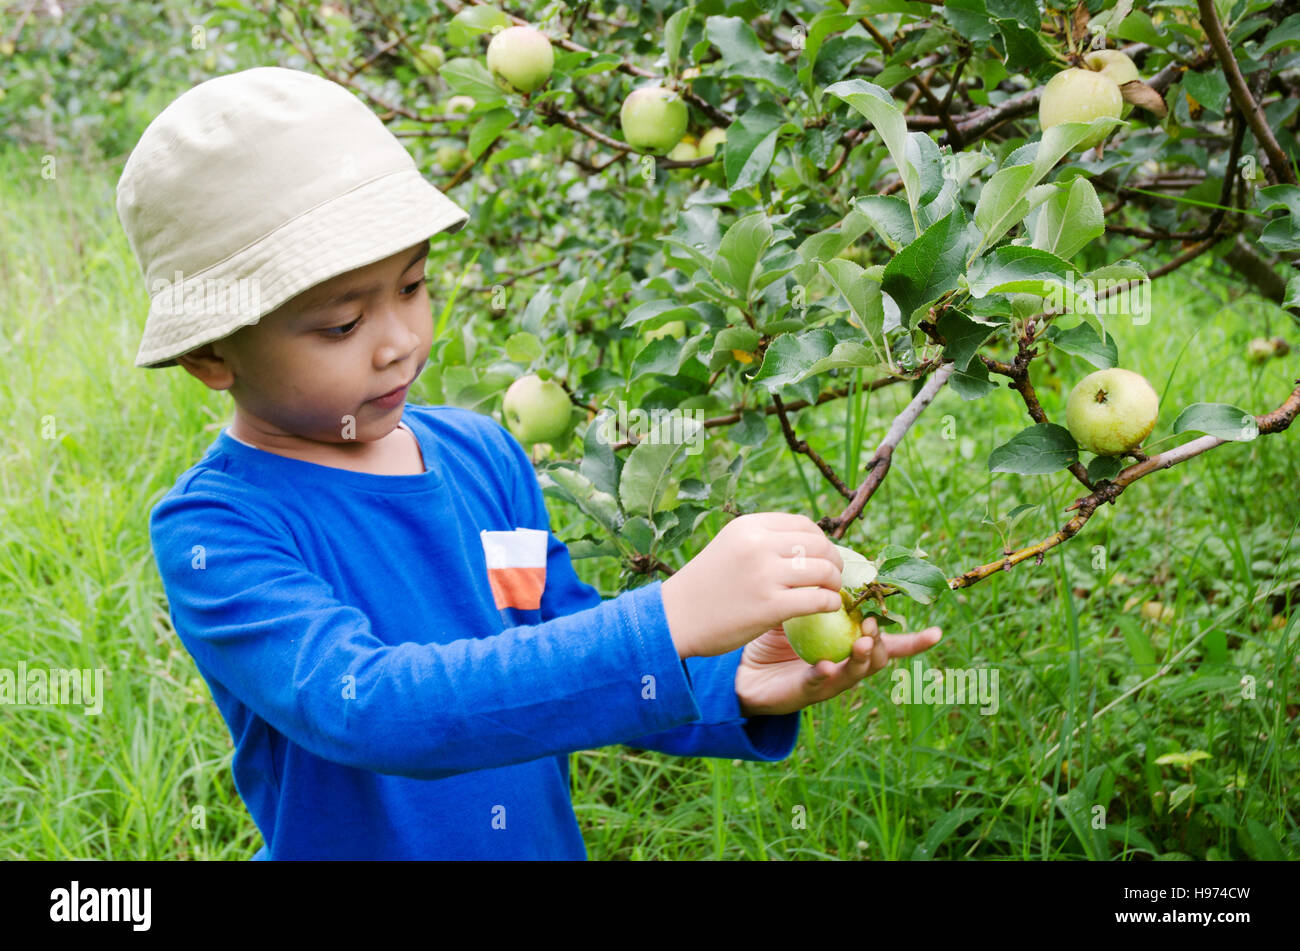 a boy picking apples, in the apple plantations at Malang, East Java Stock Photo